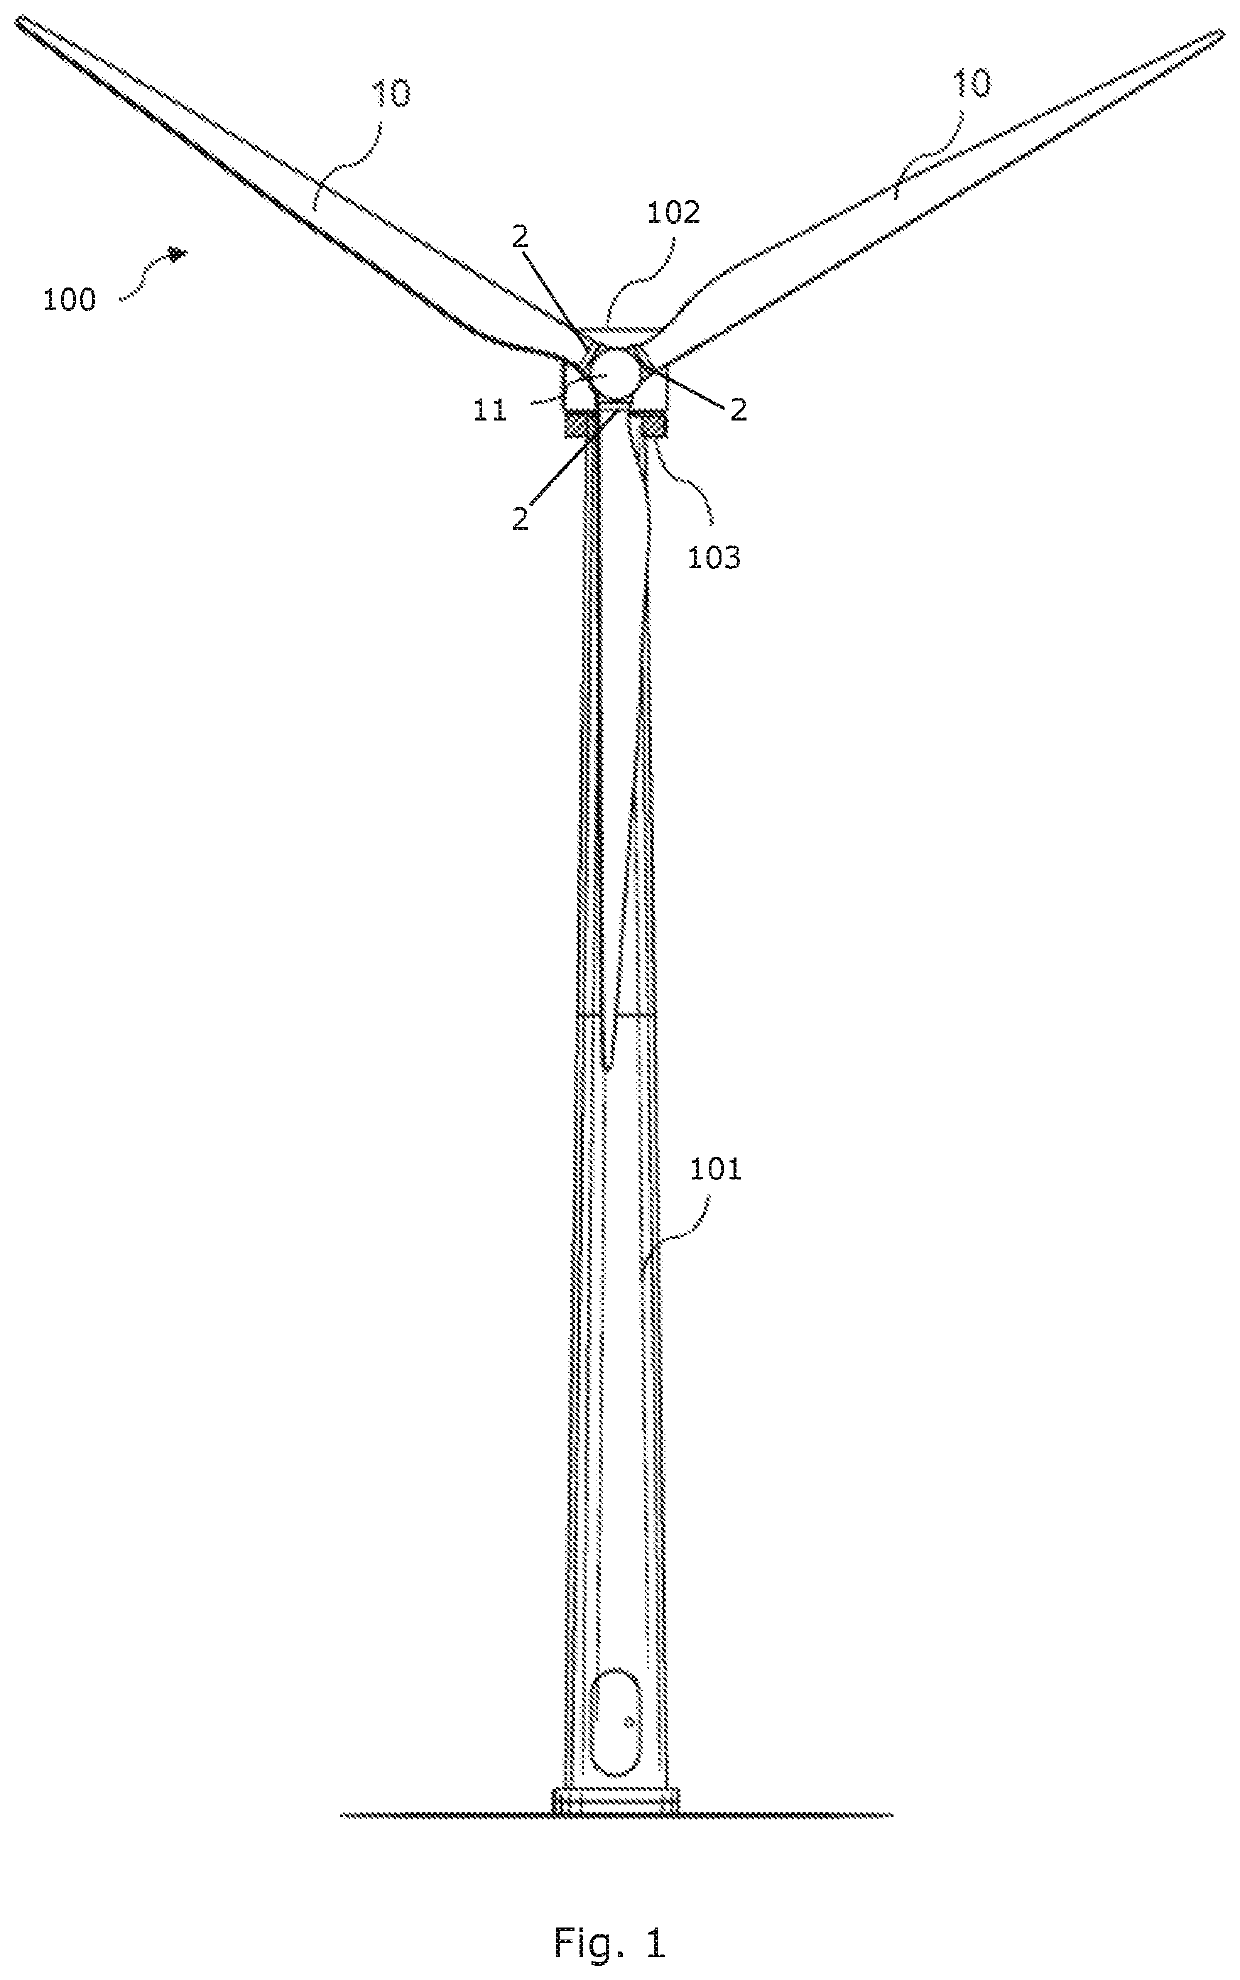 A rotor for a wind turbine with a pitch bearing unit